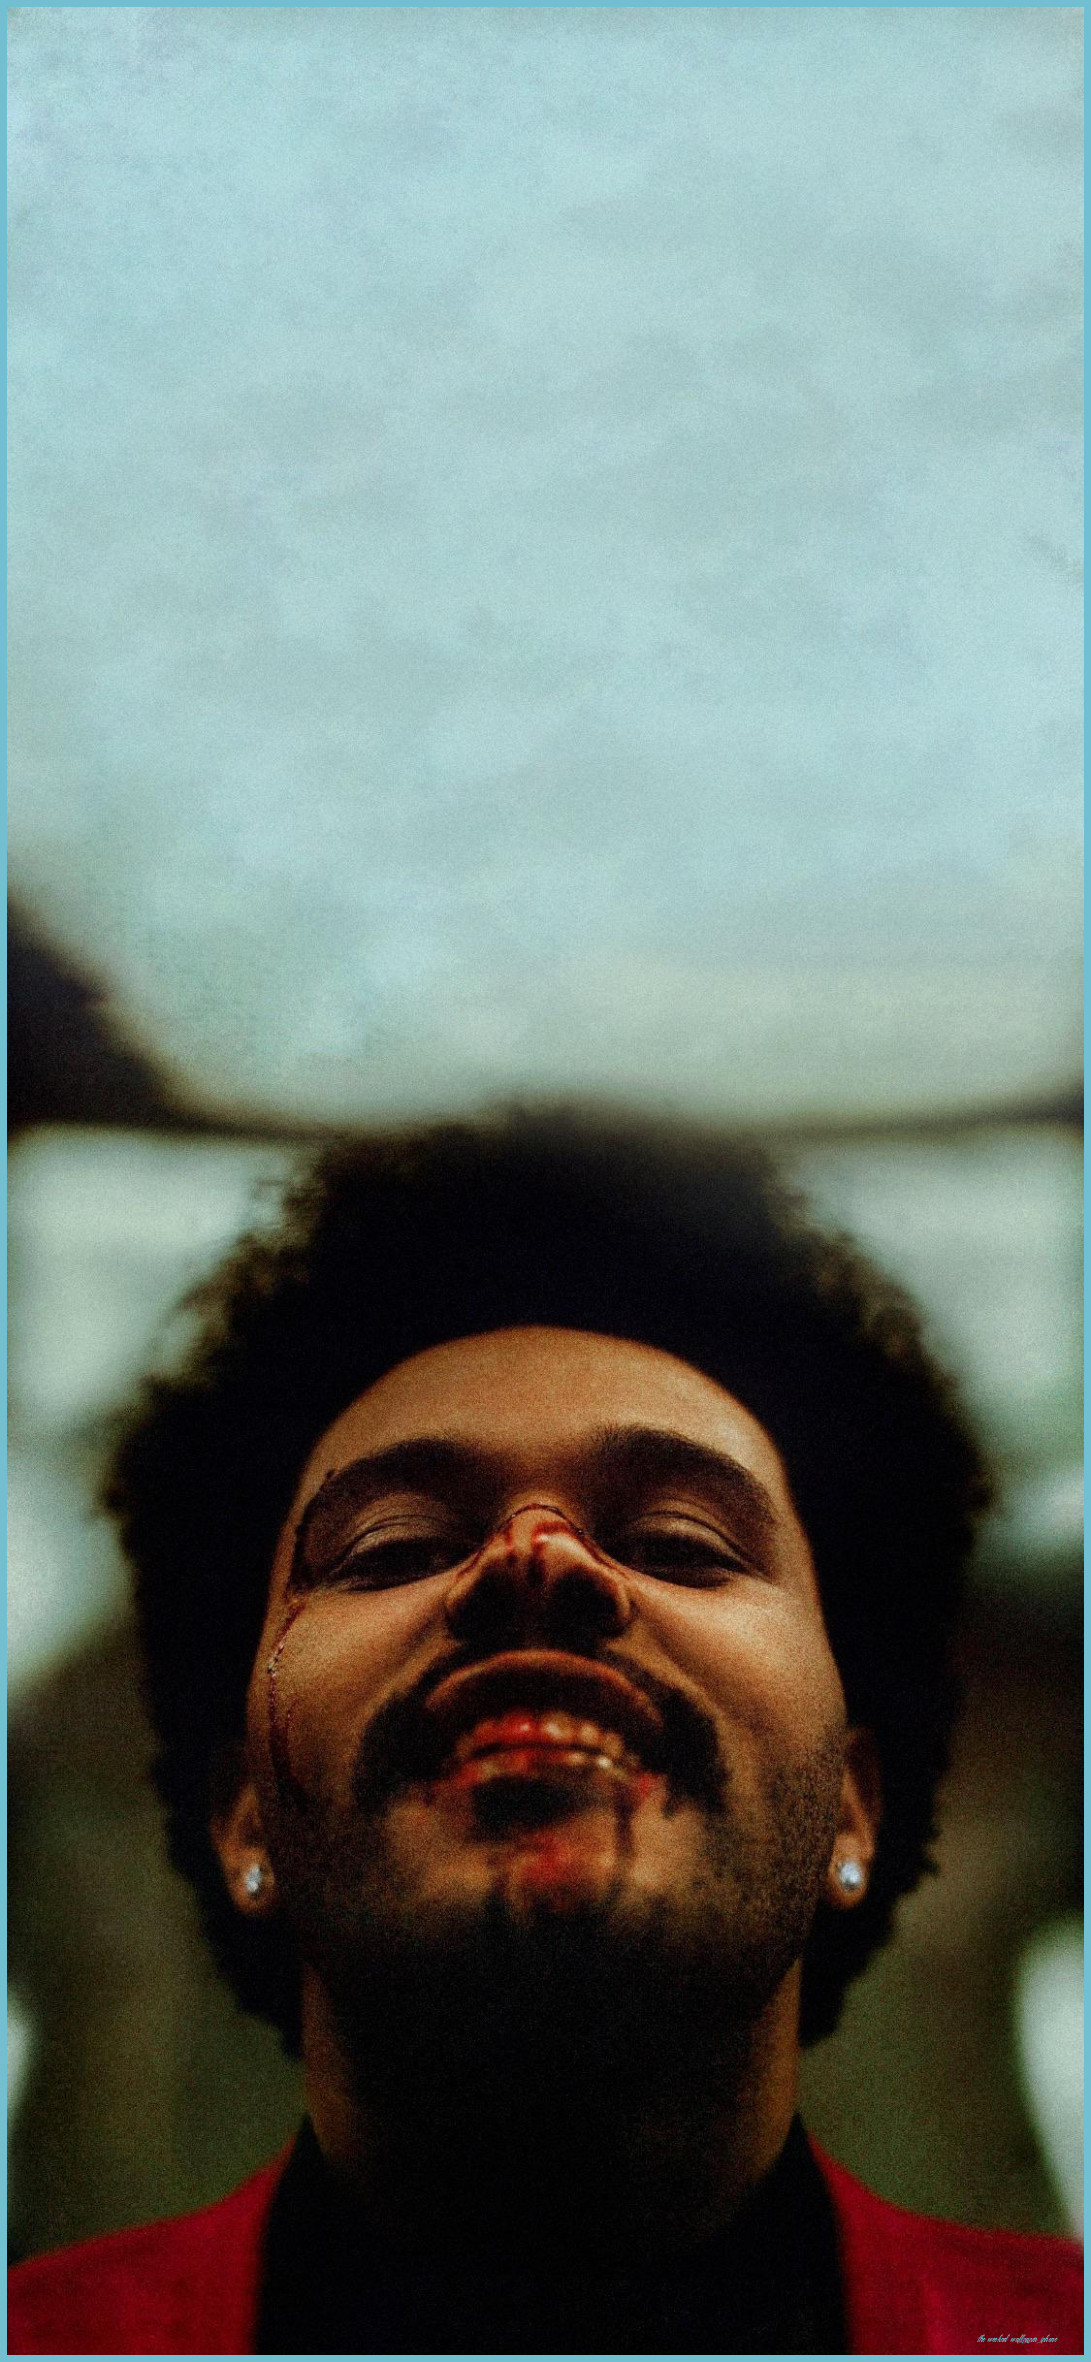 Seven Brilliant Ways To Advertise The Weeknd Wallpaper iPhone. The Weeknd Wallpaper iPhone